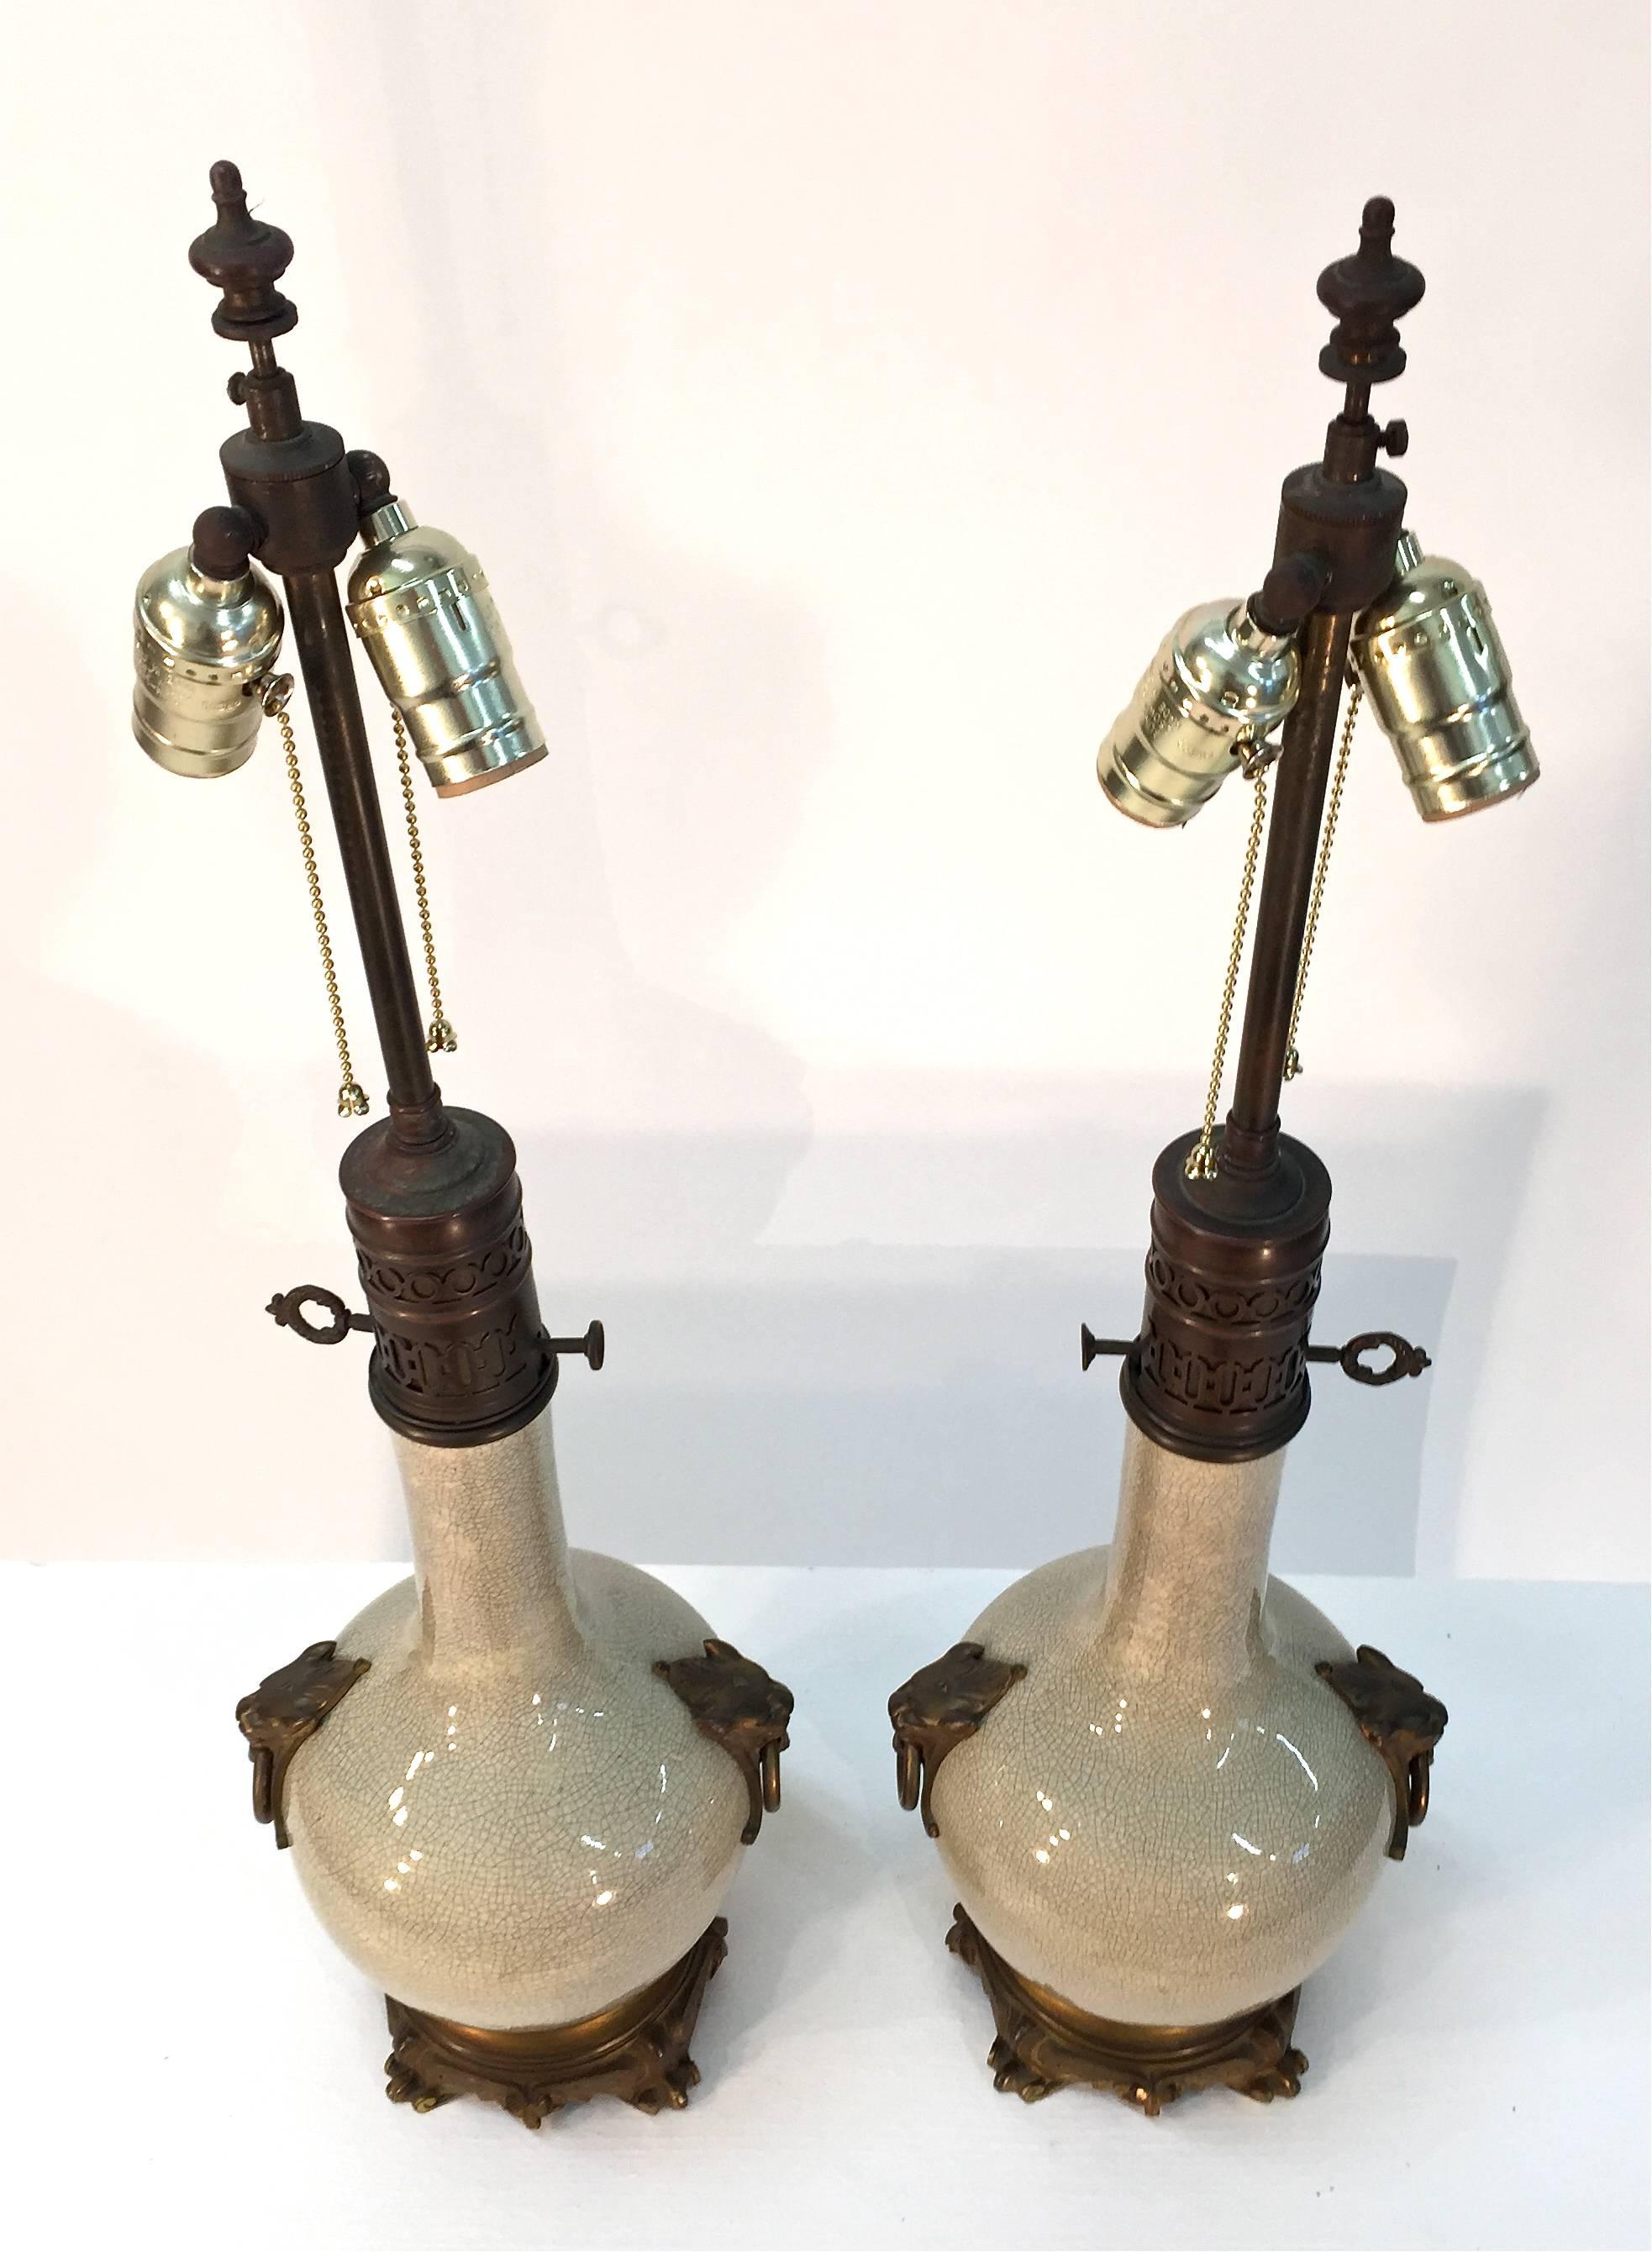 19th Century, French, Bronze-Mounted Crackle Glaze Ceramic Lamps For Sale 2